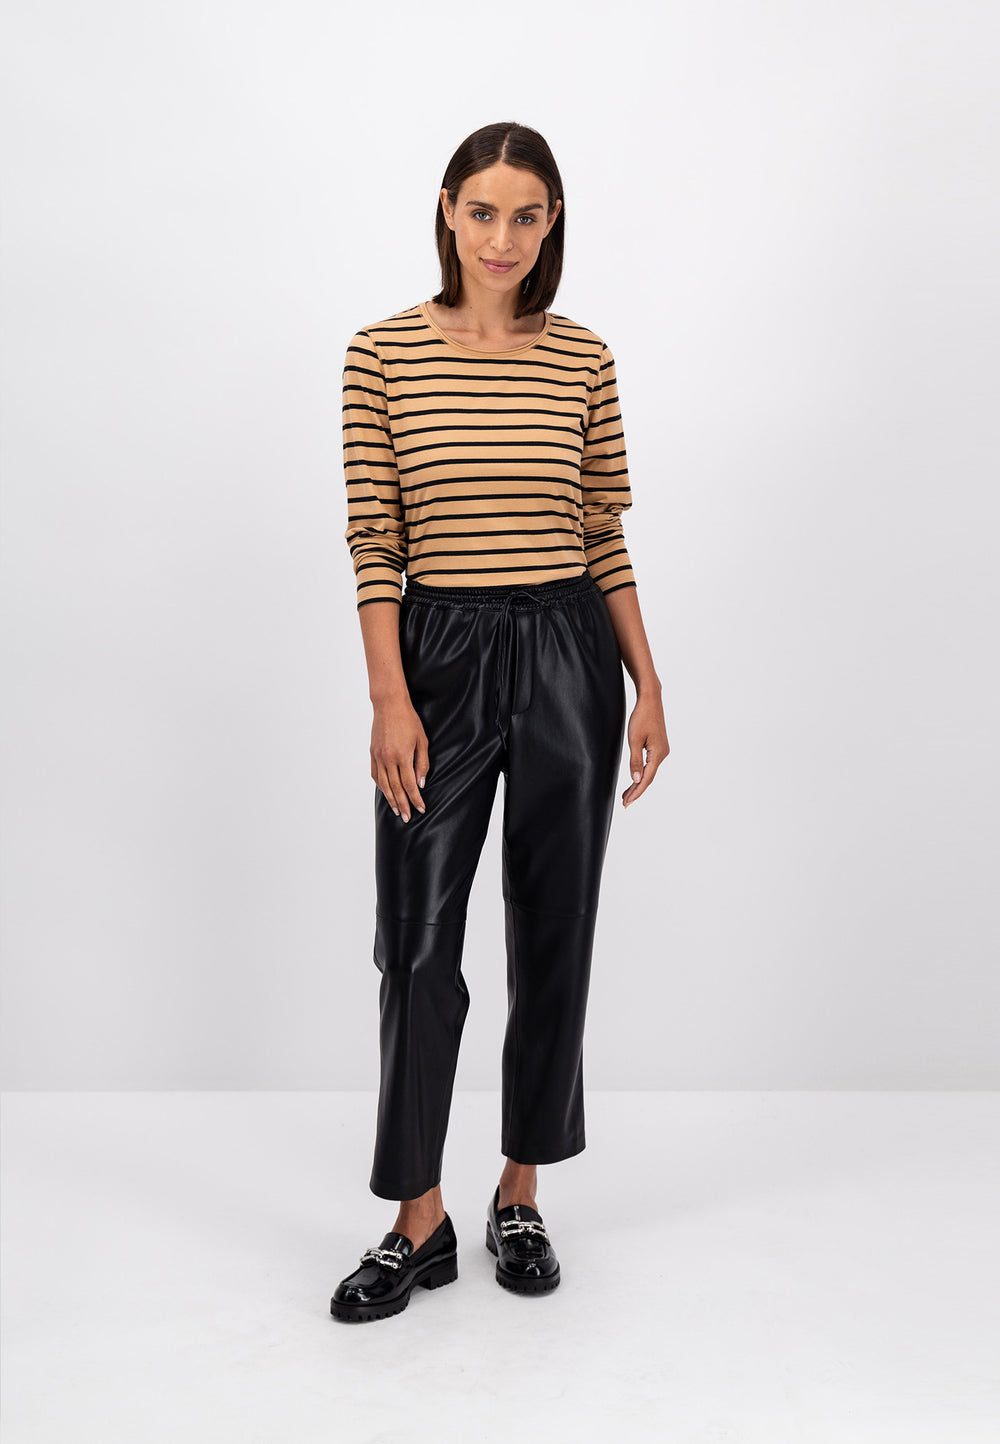 Ladies pants & skirts | Fynch-Hatton Official Online Shop – FYNCH-HATTON |  Offizieller Online Shop